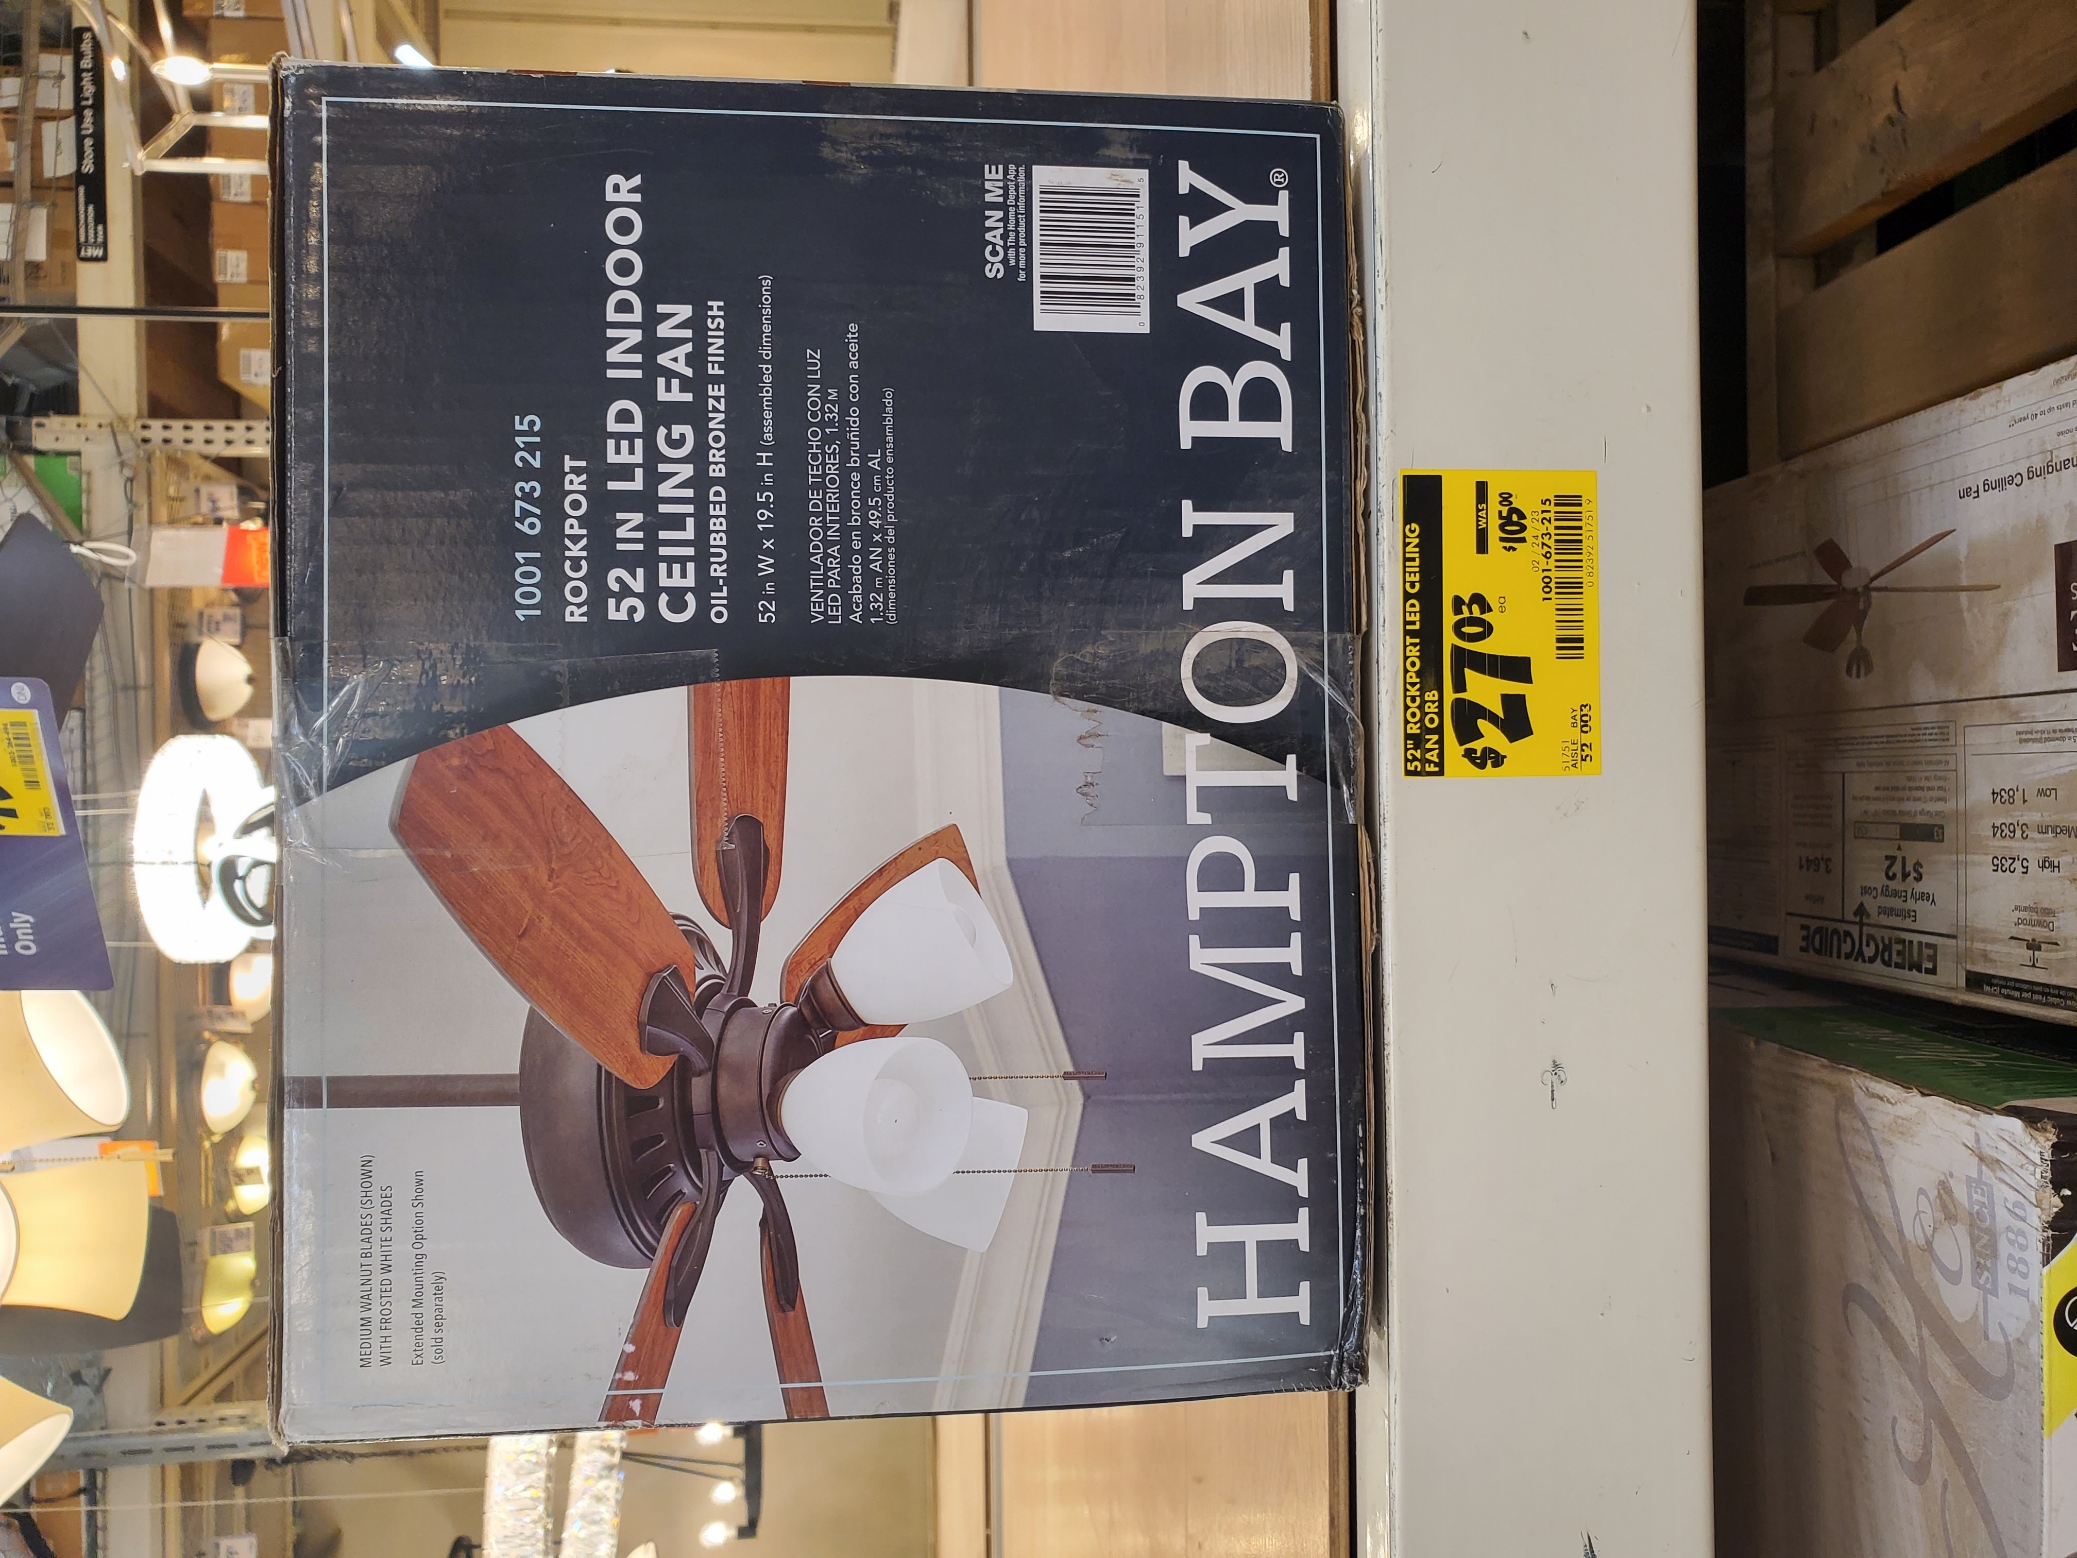 YMMV Hampton Bay Rockport 52 in. Indoor LED Oil Rubbed Bronze Ceiling Fan with Light Kit, Downrod, Reversible Blades and Reversible Motor $27.03